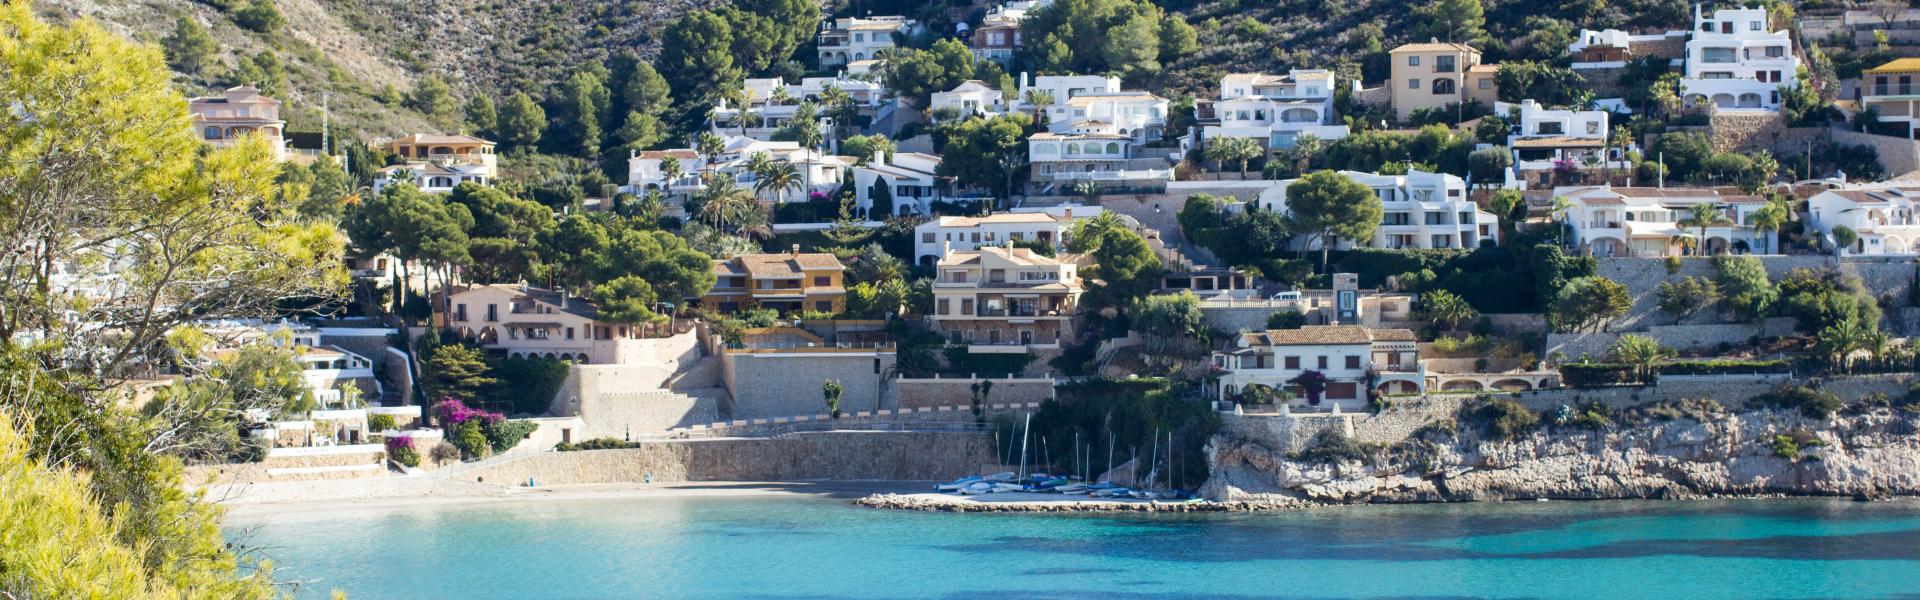 Search for the perfect holiday rental in Moraira  - Casamundo